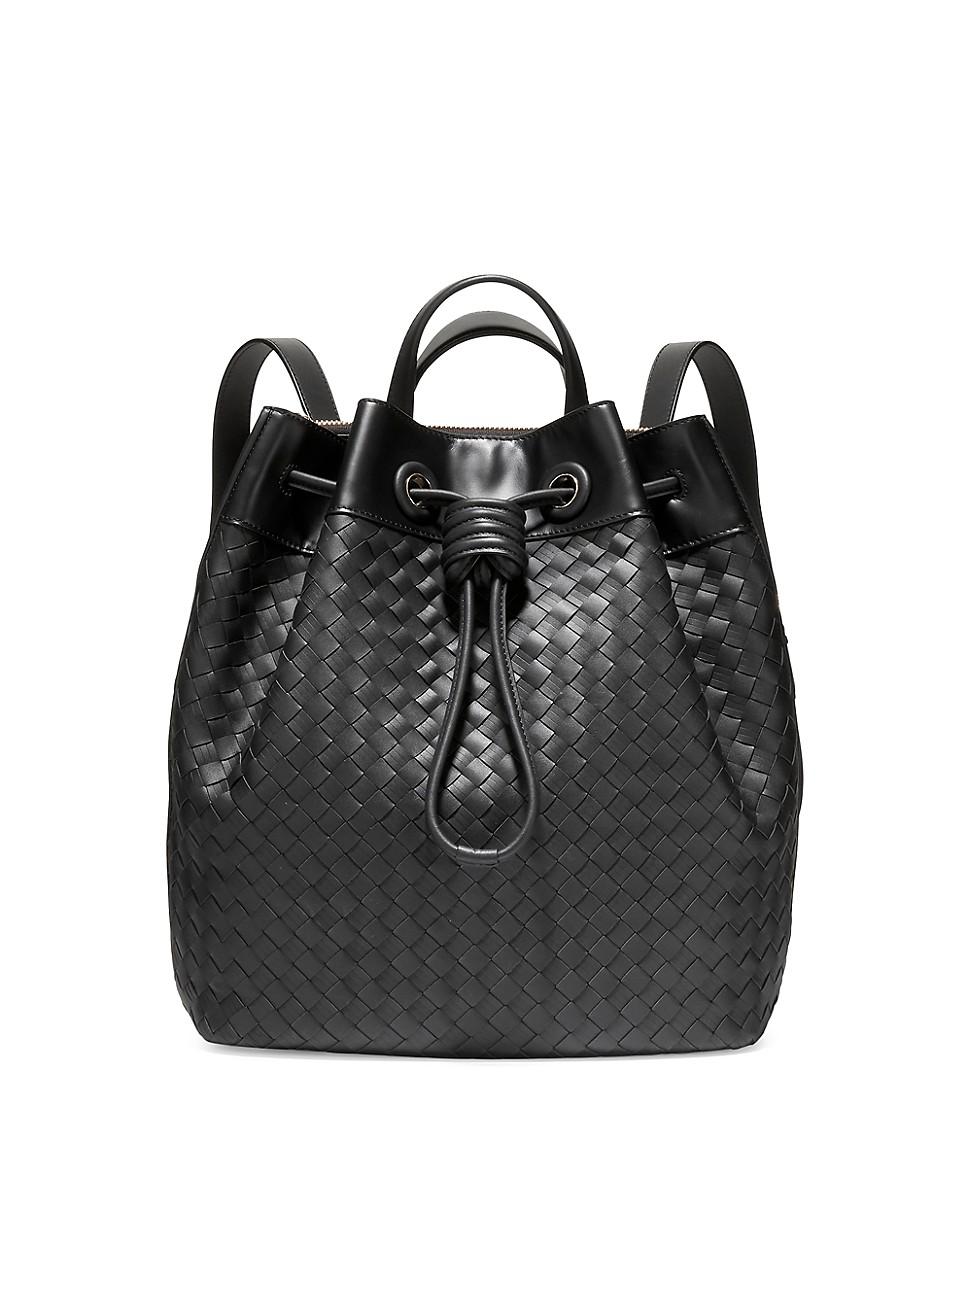 Cole Haan Woven Leather Drawstring Backpack in Black | Lyst